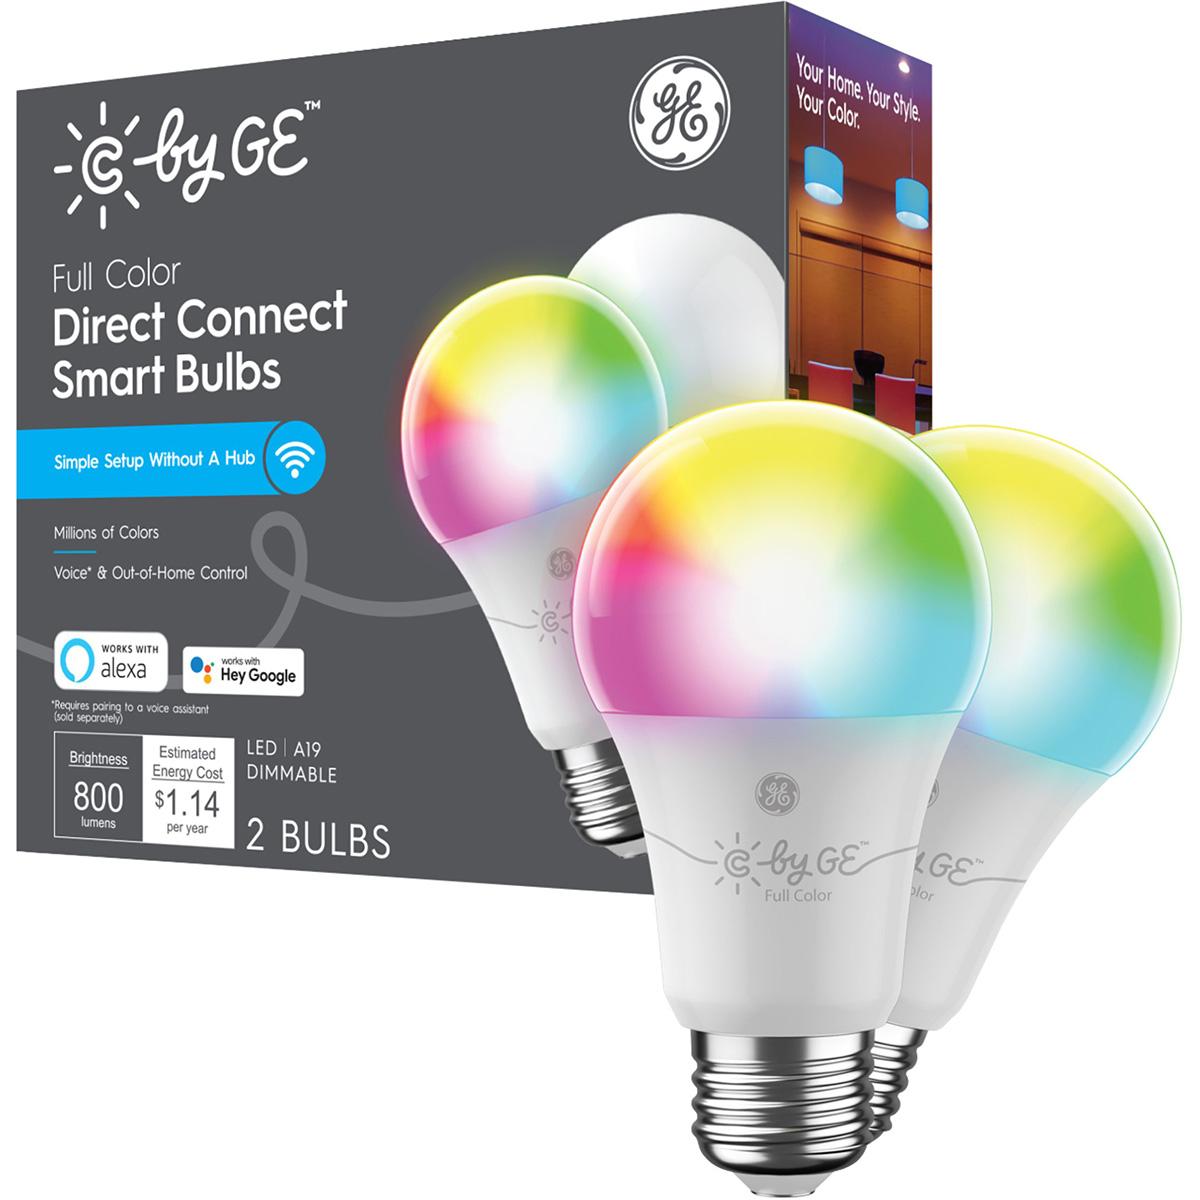 C by GE Direct Connect Light Bulbs for $19.99